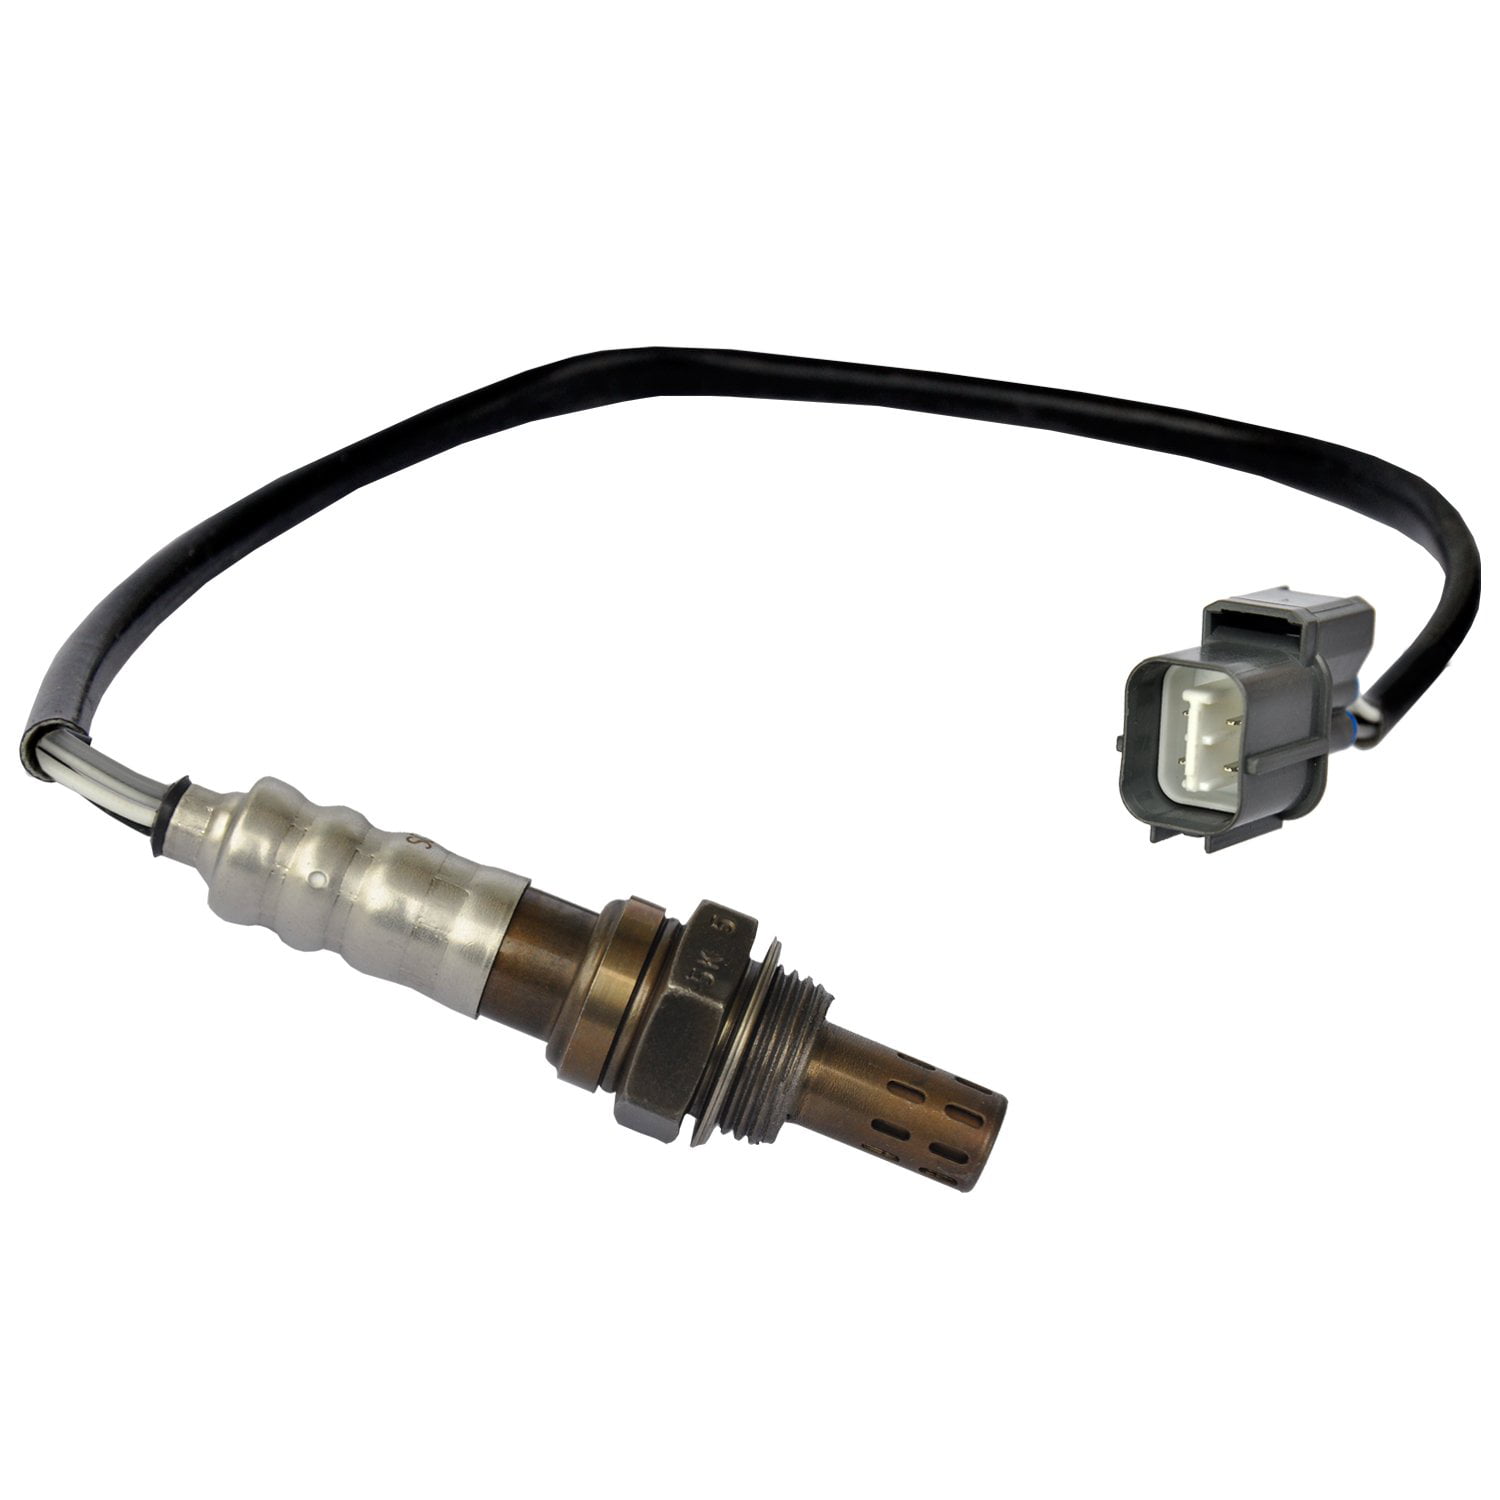 Details about   New O2 Oxygen Sensor Downstream fit 90-02 Honda Accord CIVIC L4 01-03 ACURA CL